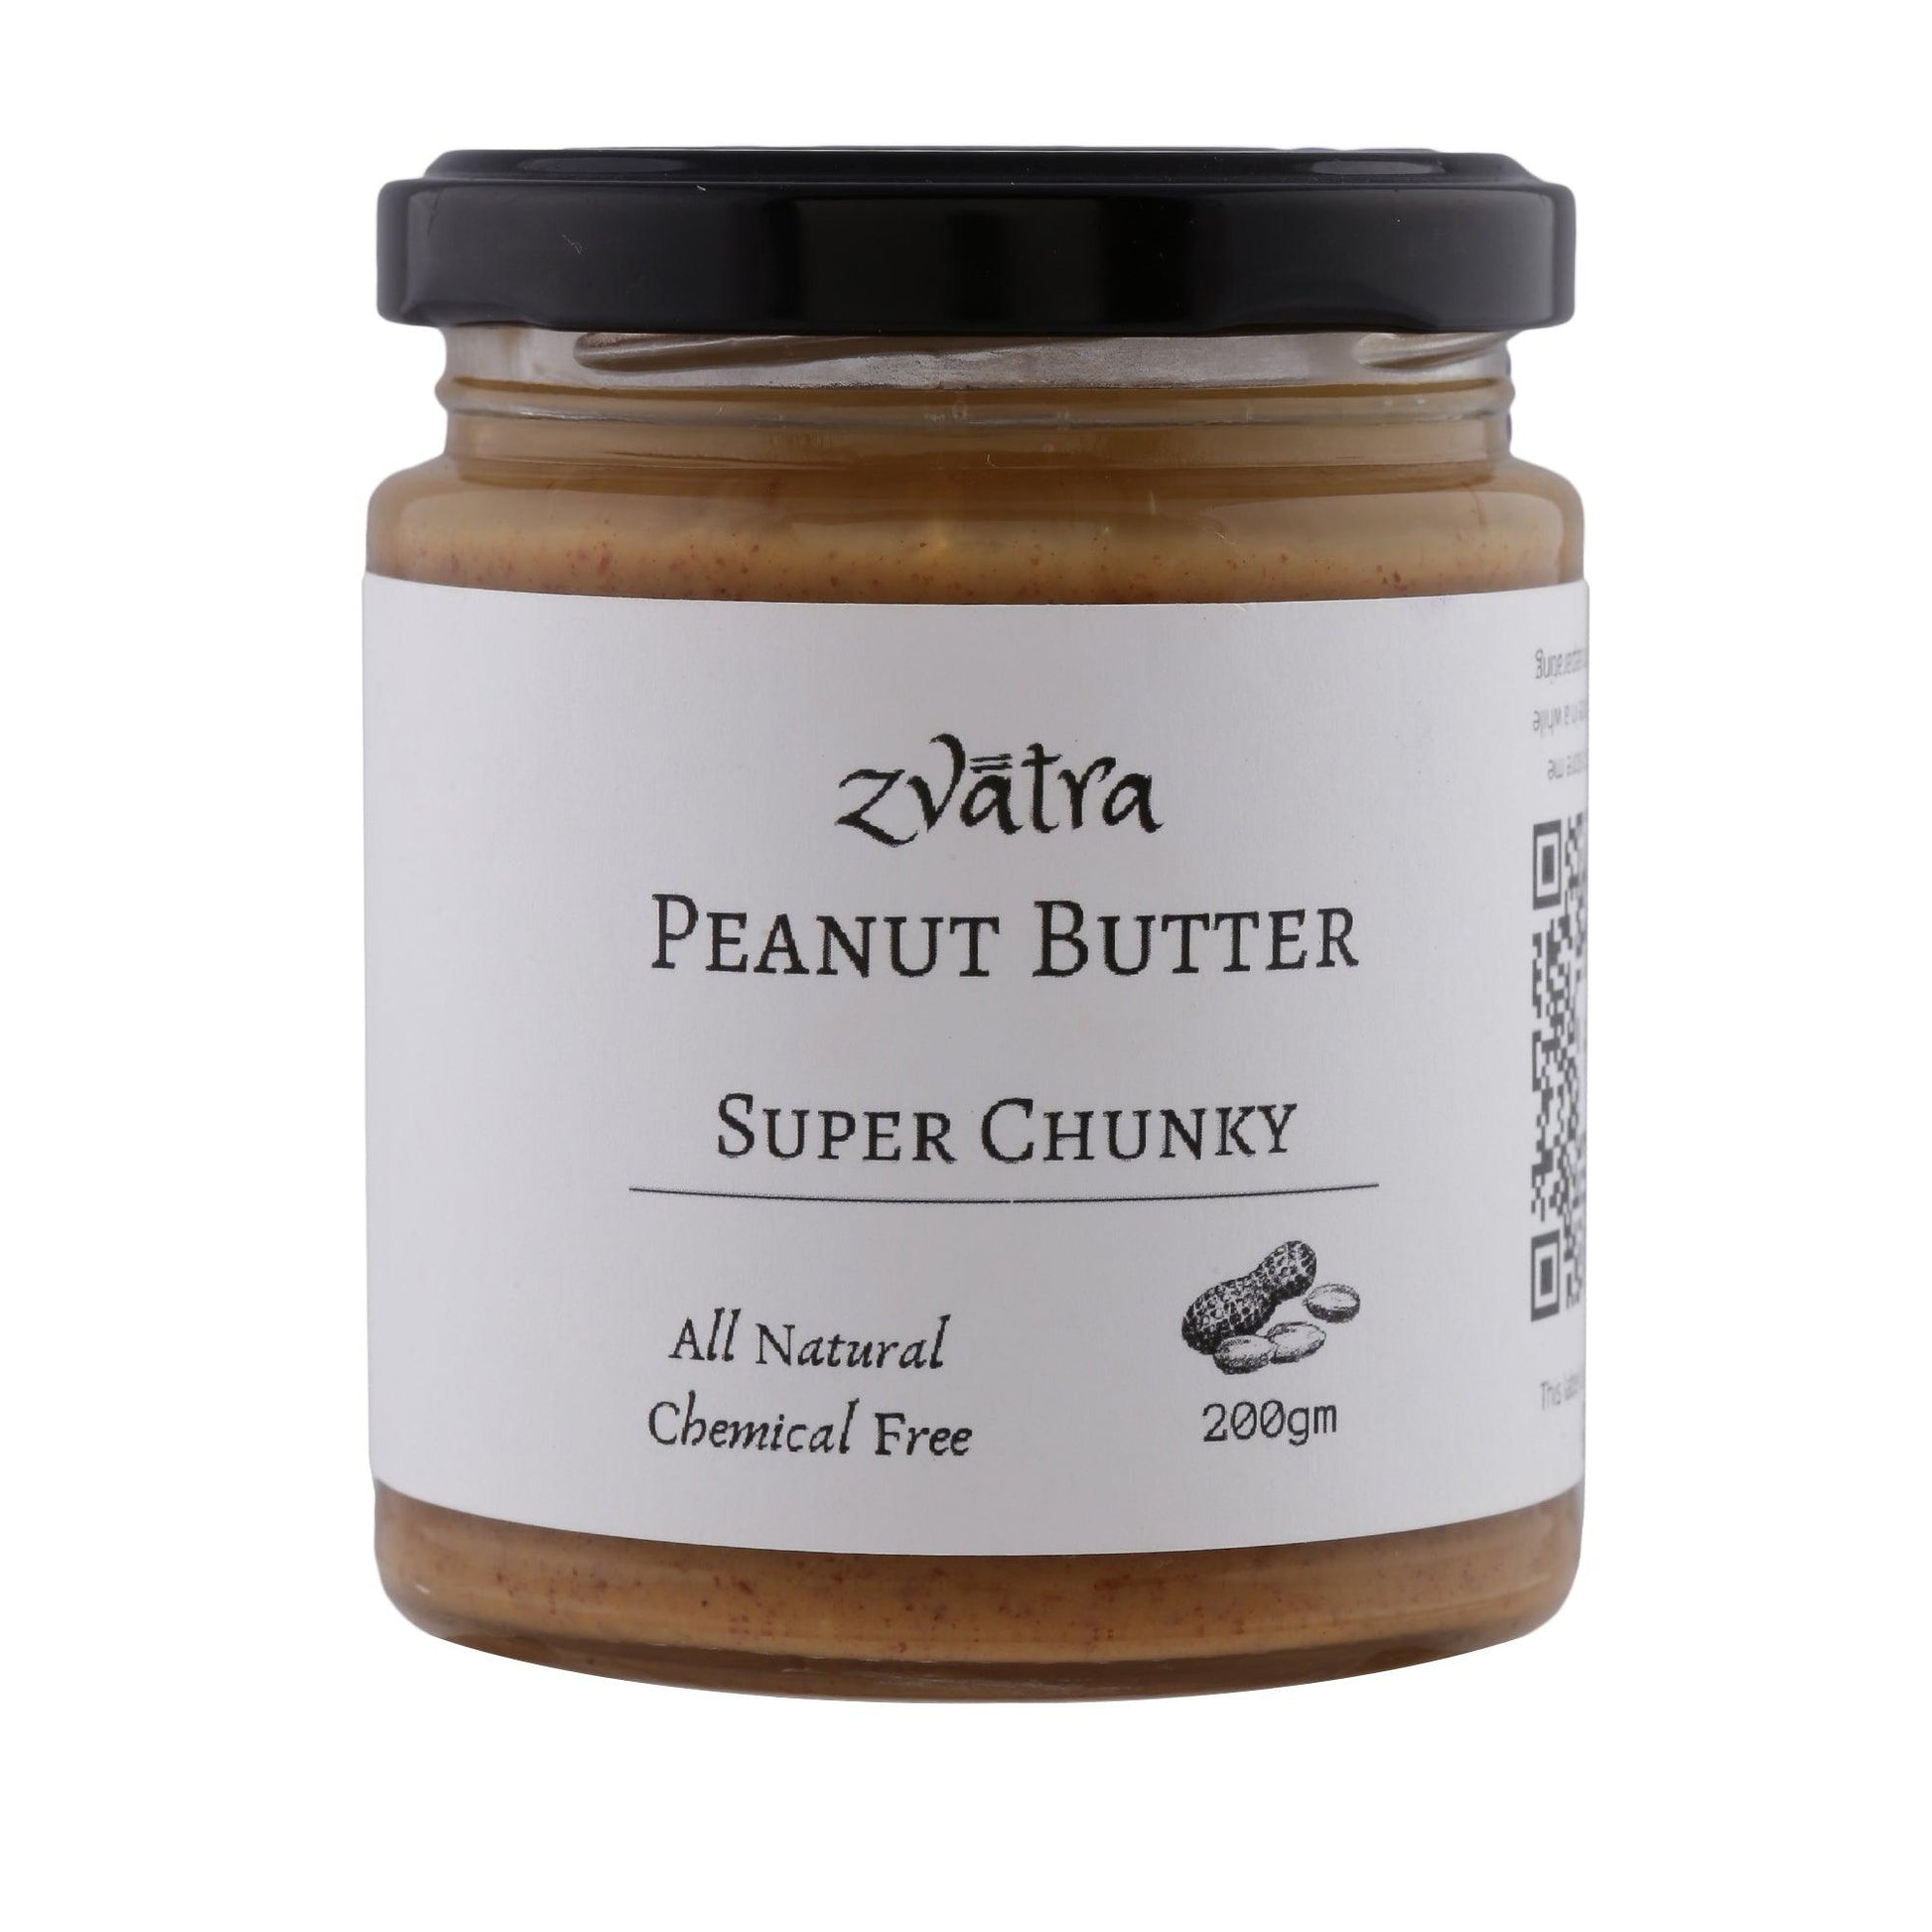 Peanut Butter - Super Chunky - Sweetened with Jaggery - Wildermart